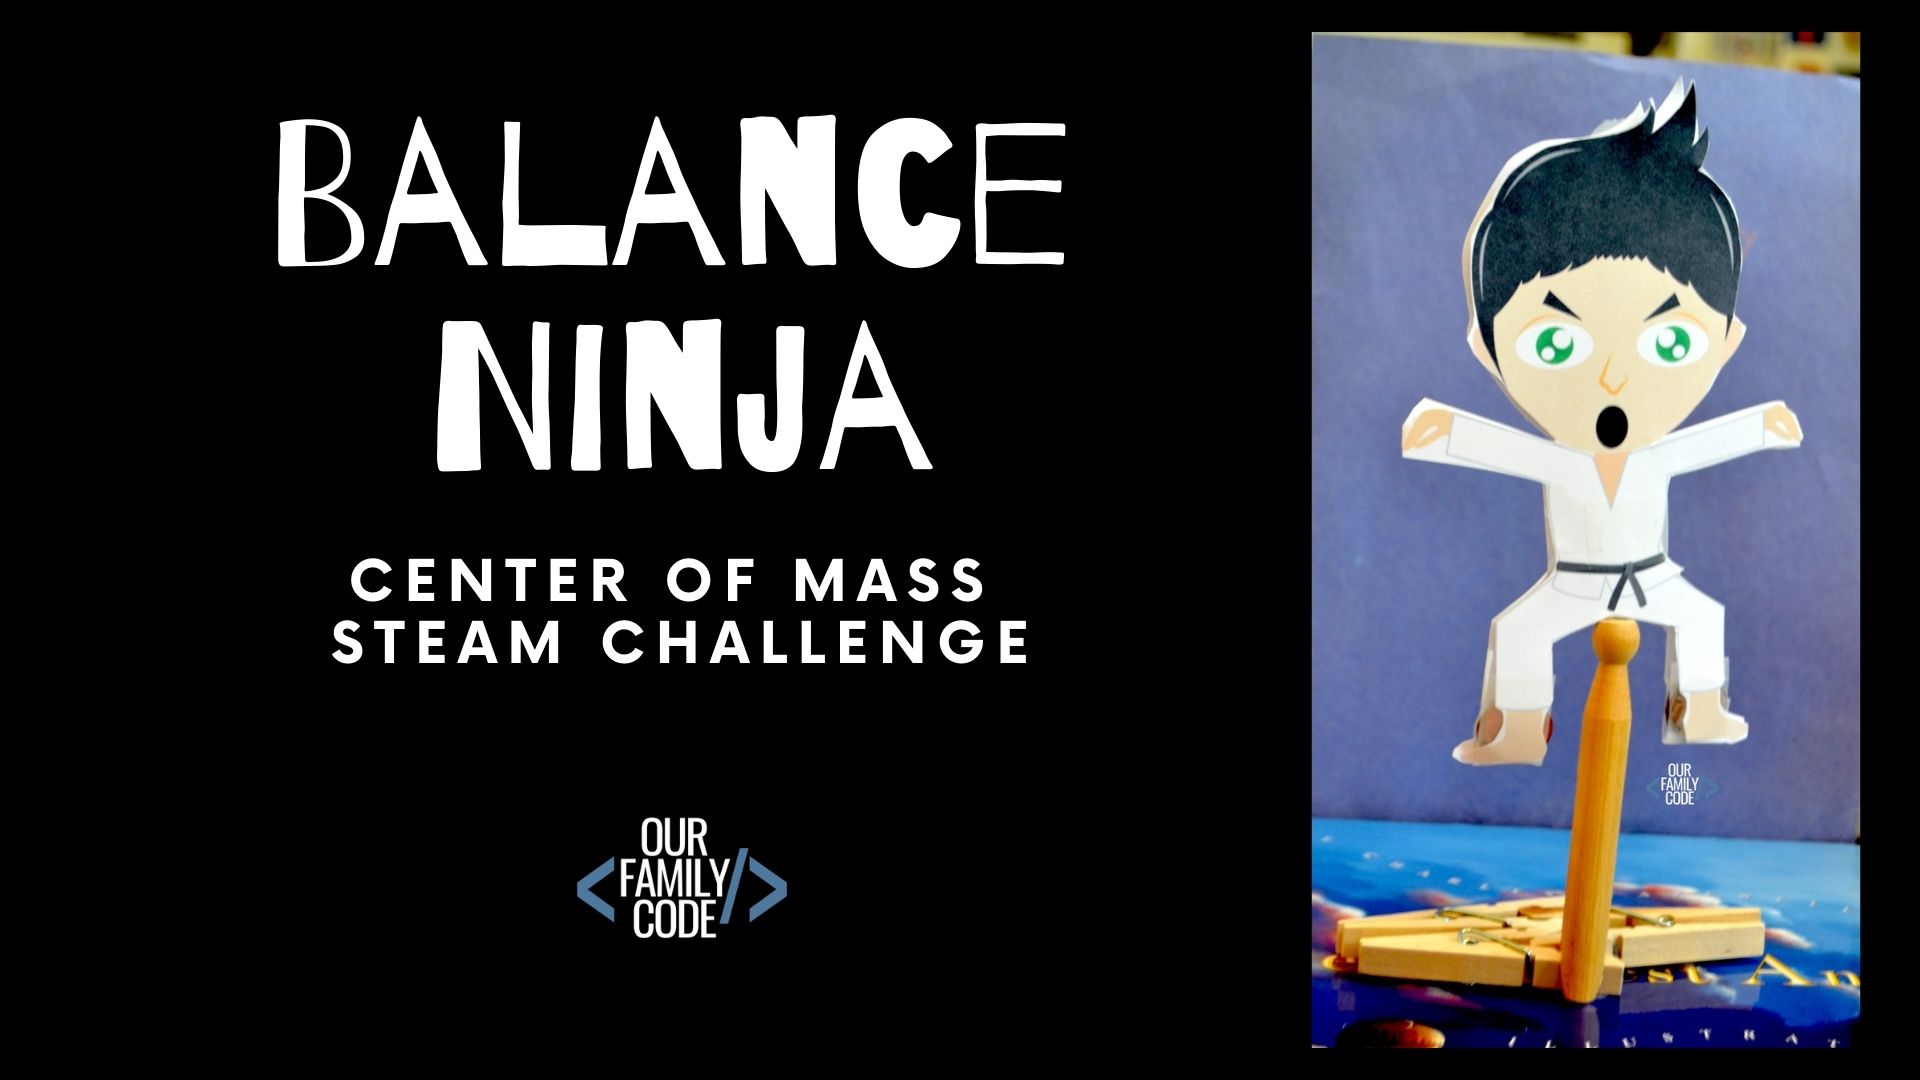 This balance ninja activity is designed to help kids understand what the center of mass is and encourage critical thinking to solve the ninja's balancing problem.